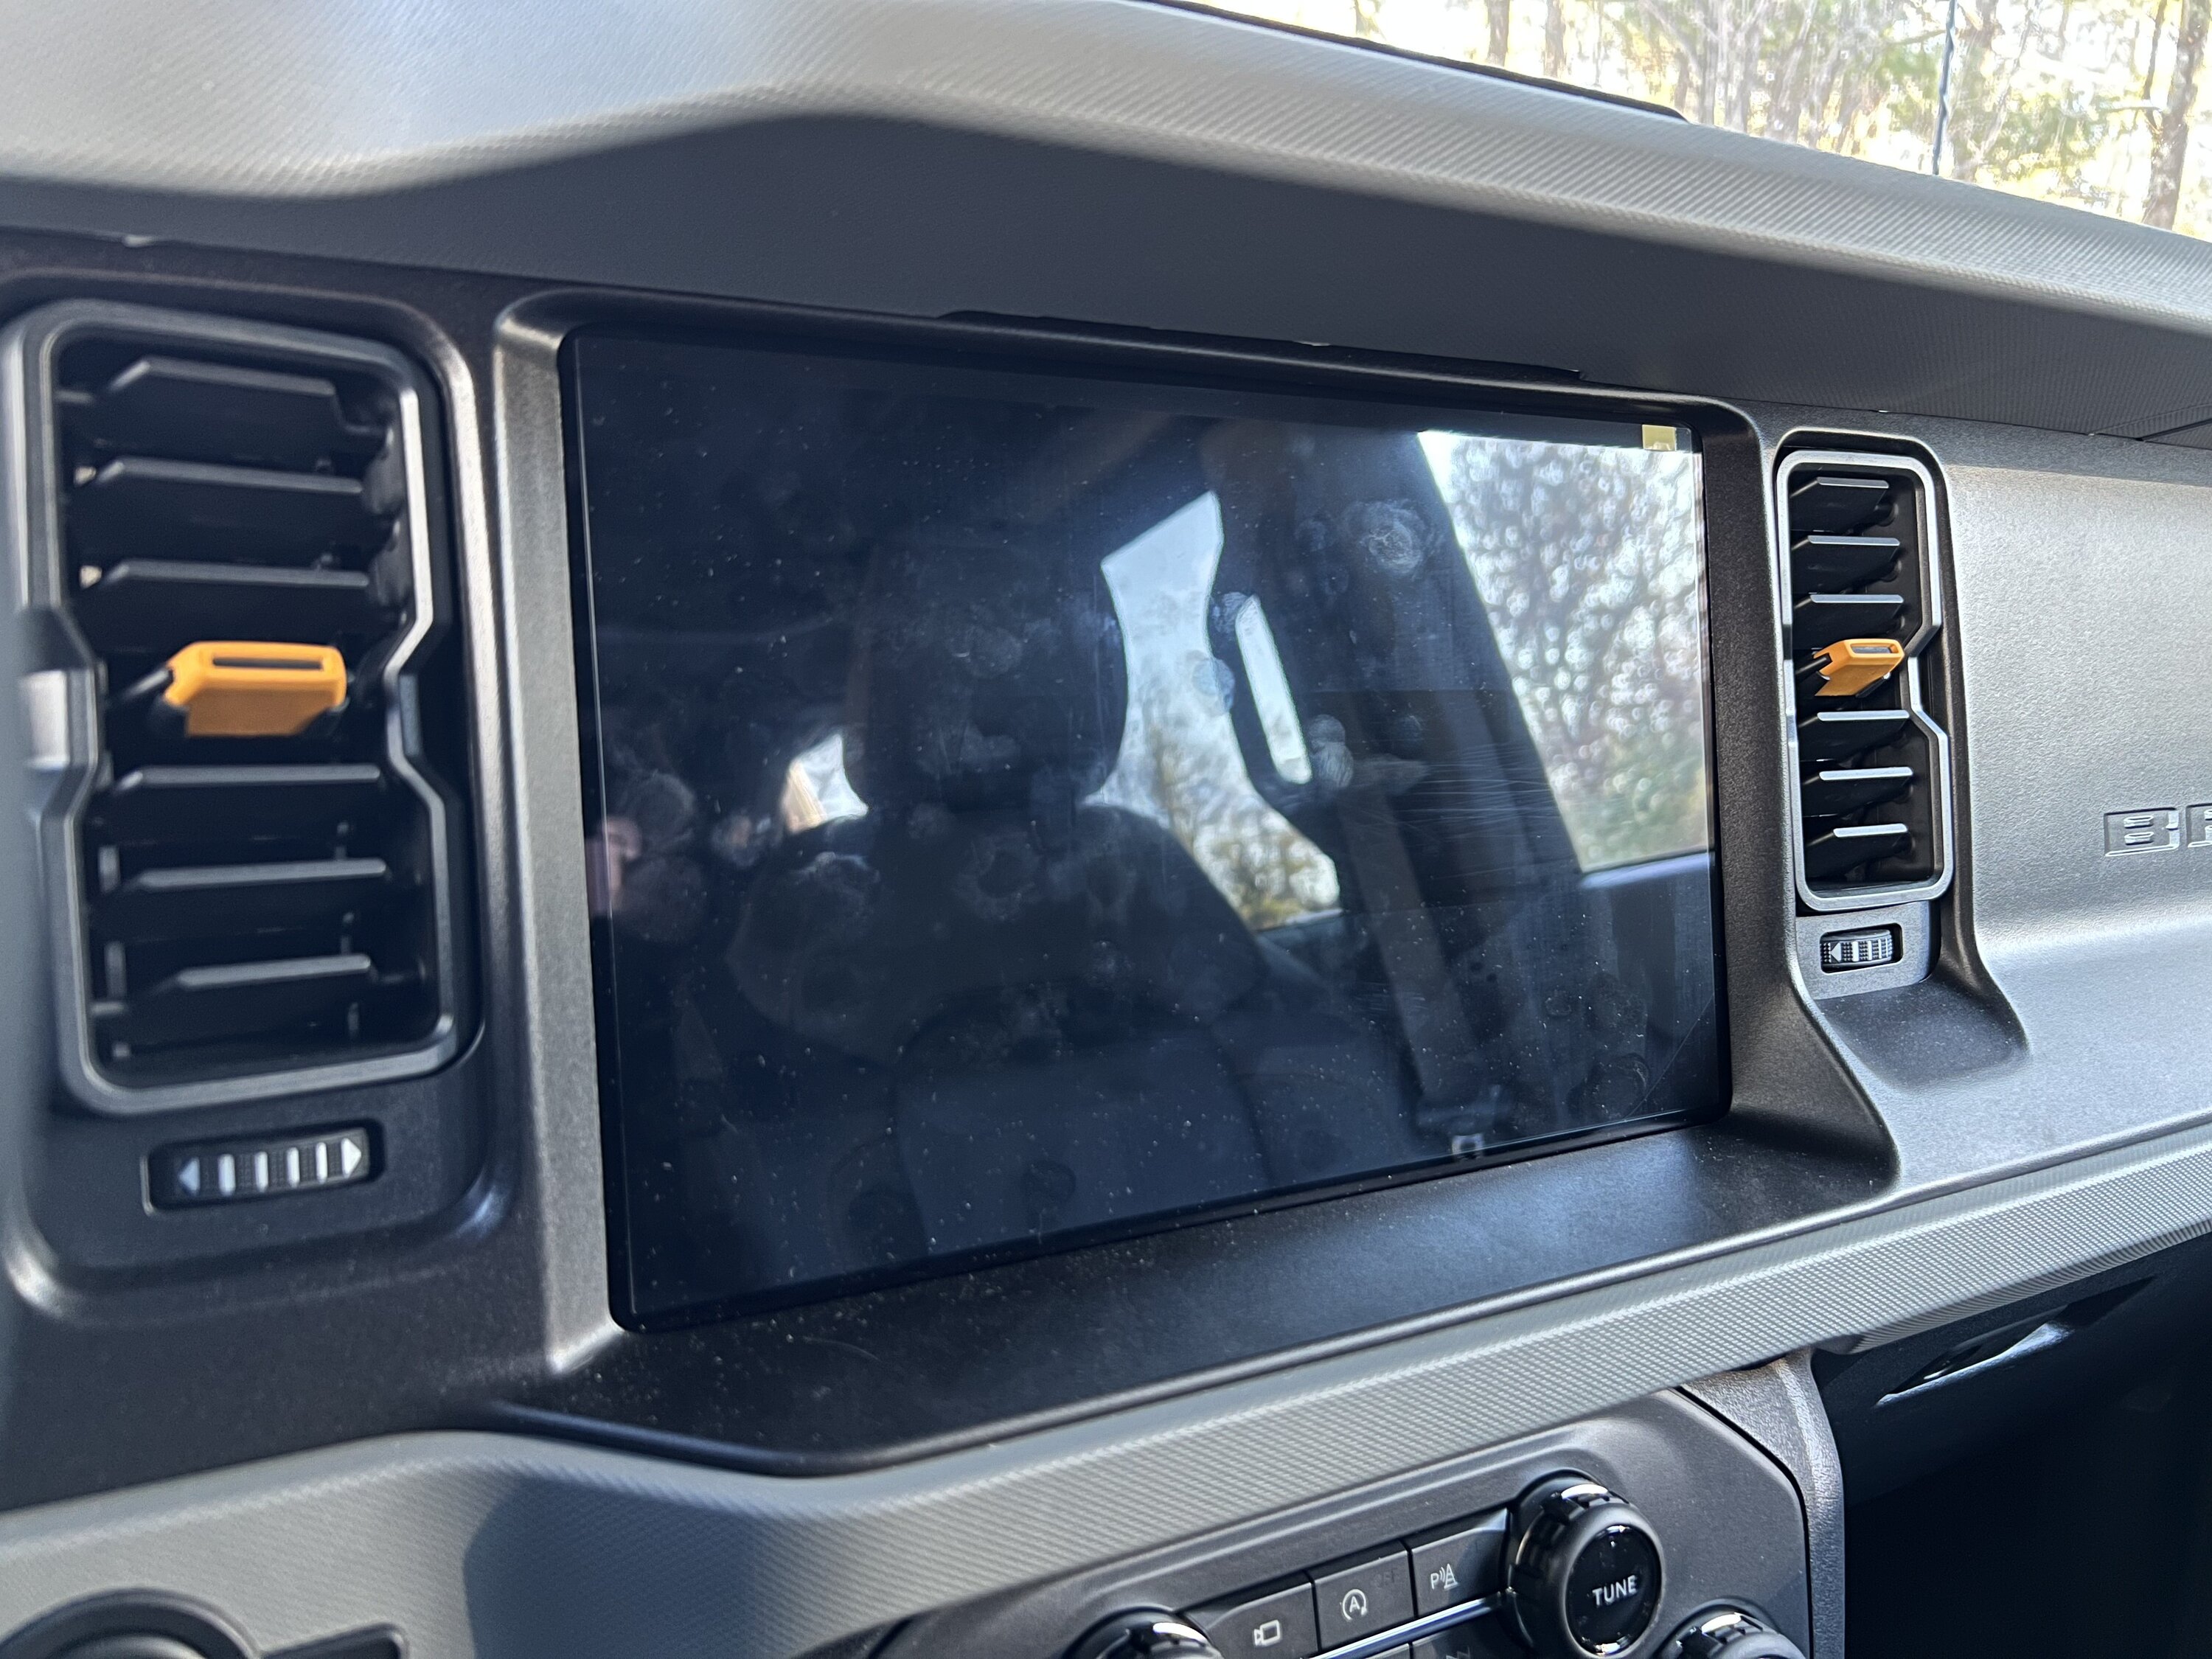 Ford Bronco Screen ProTech display screen & gauge cluster protection film - installation & review E44C99E5-2306-4601-8129-09C3696A3D7E